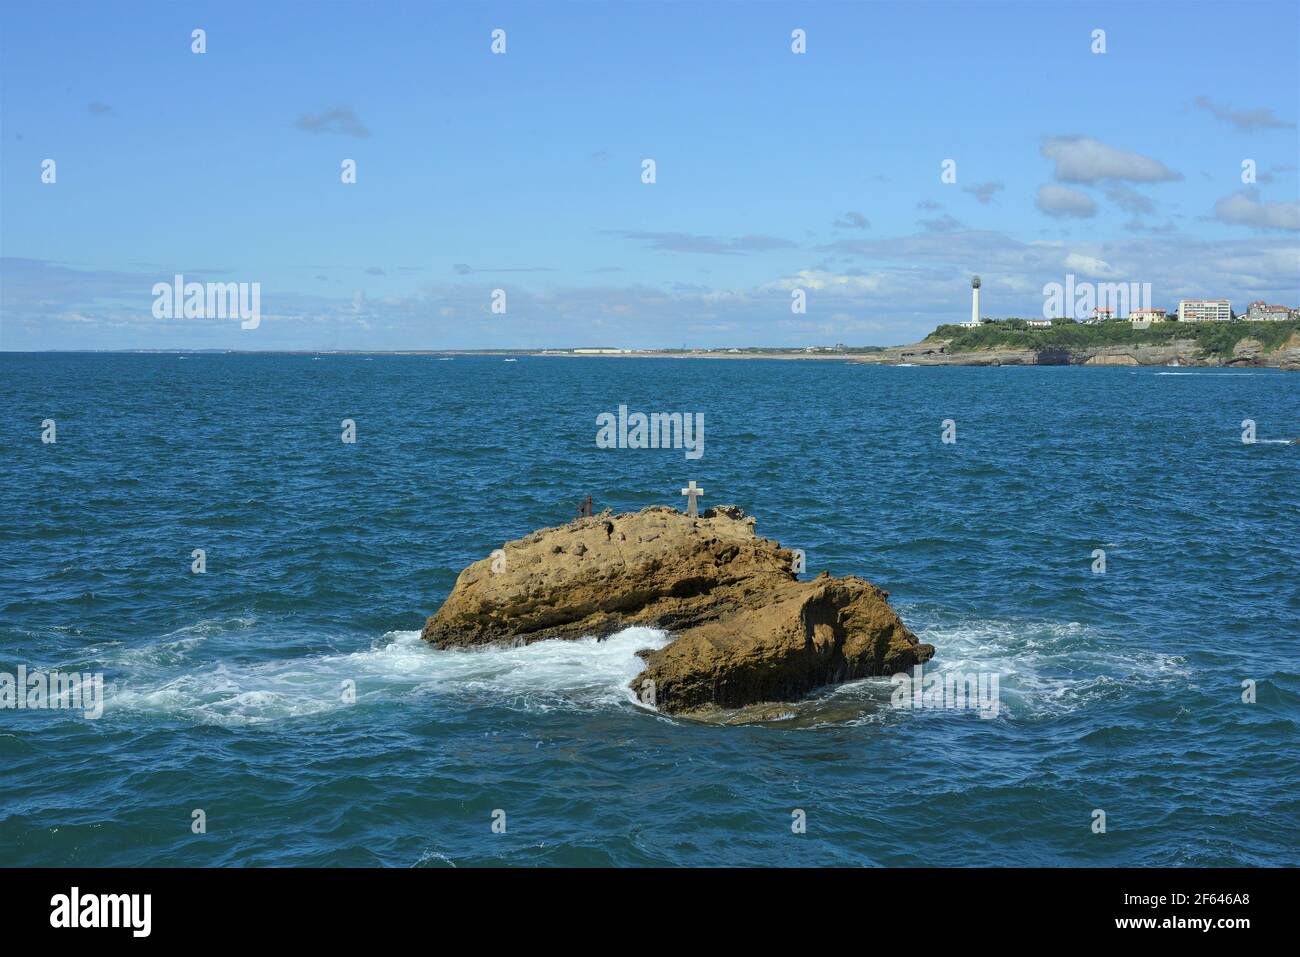 Rock of Gamaritz located on the coast of Biarritz-France Stock Photo